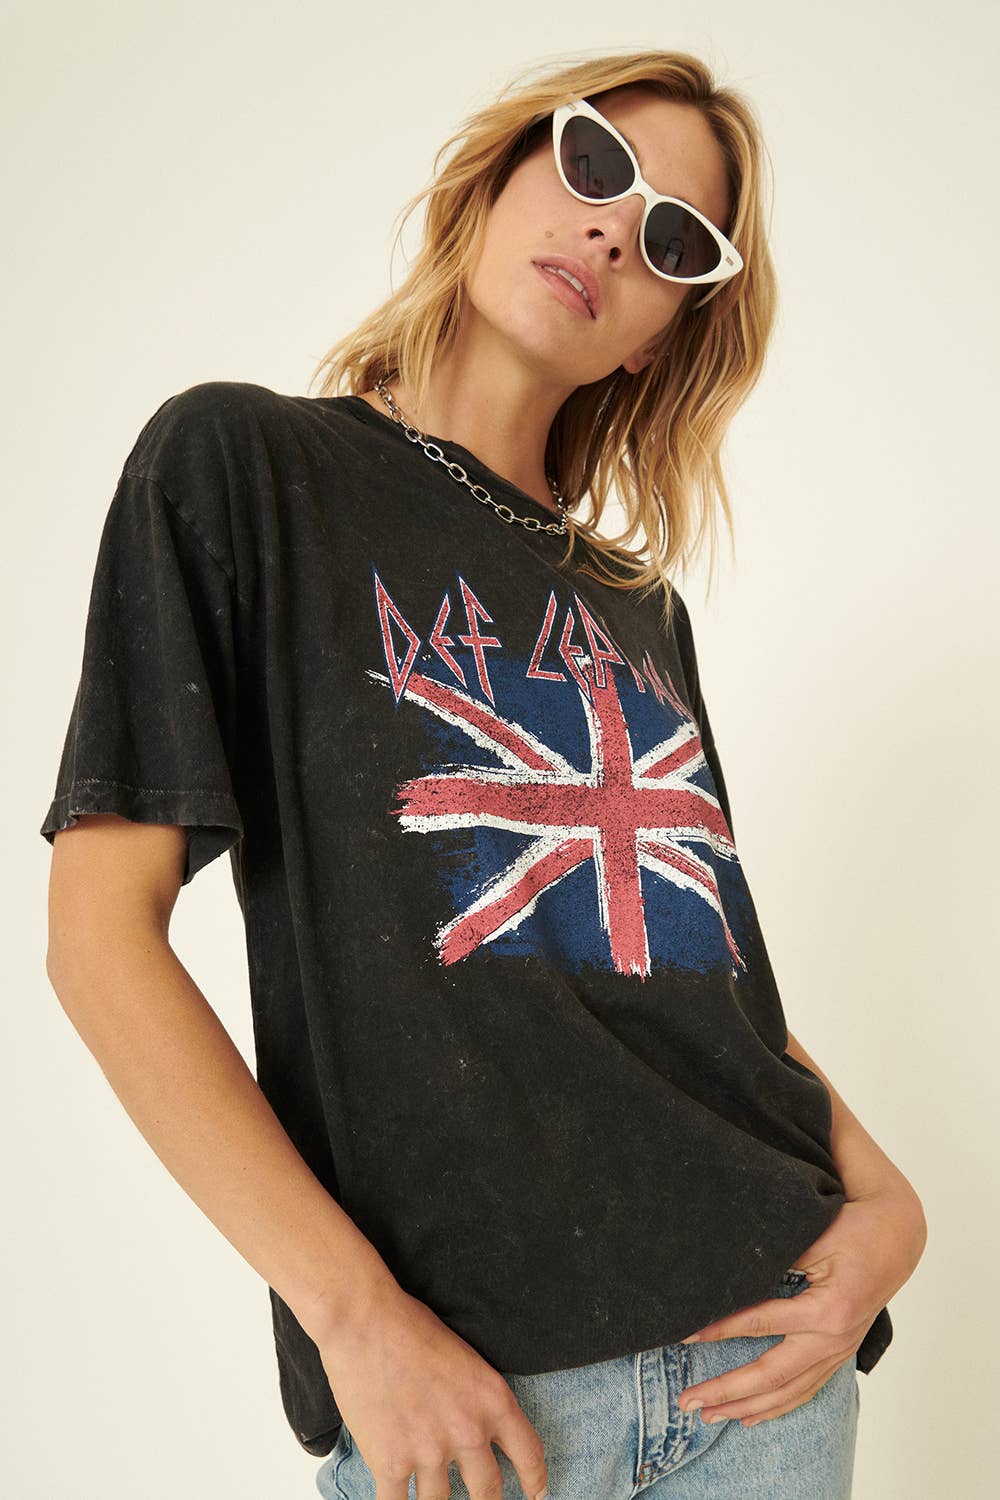 Def Leppard UK Flag Distressed Graphic Tee